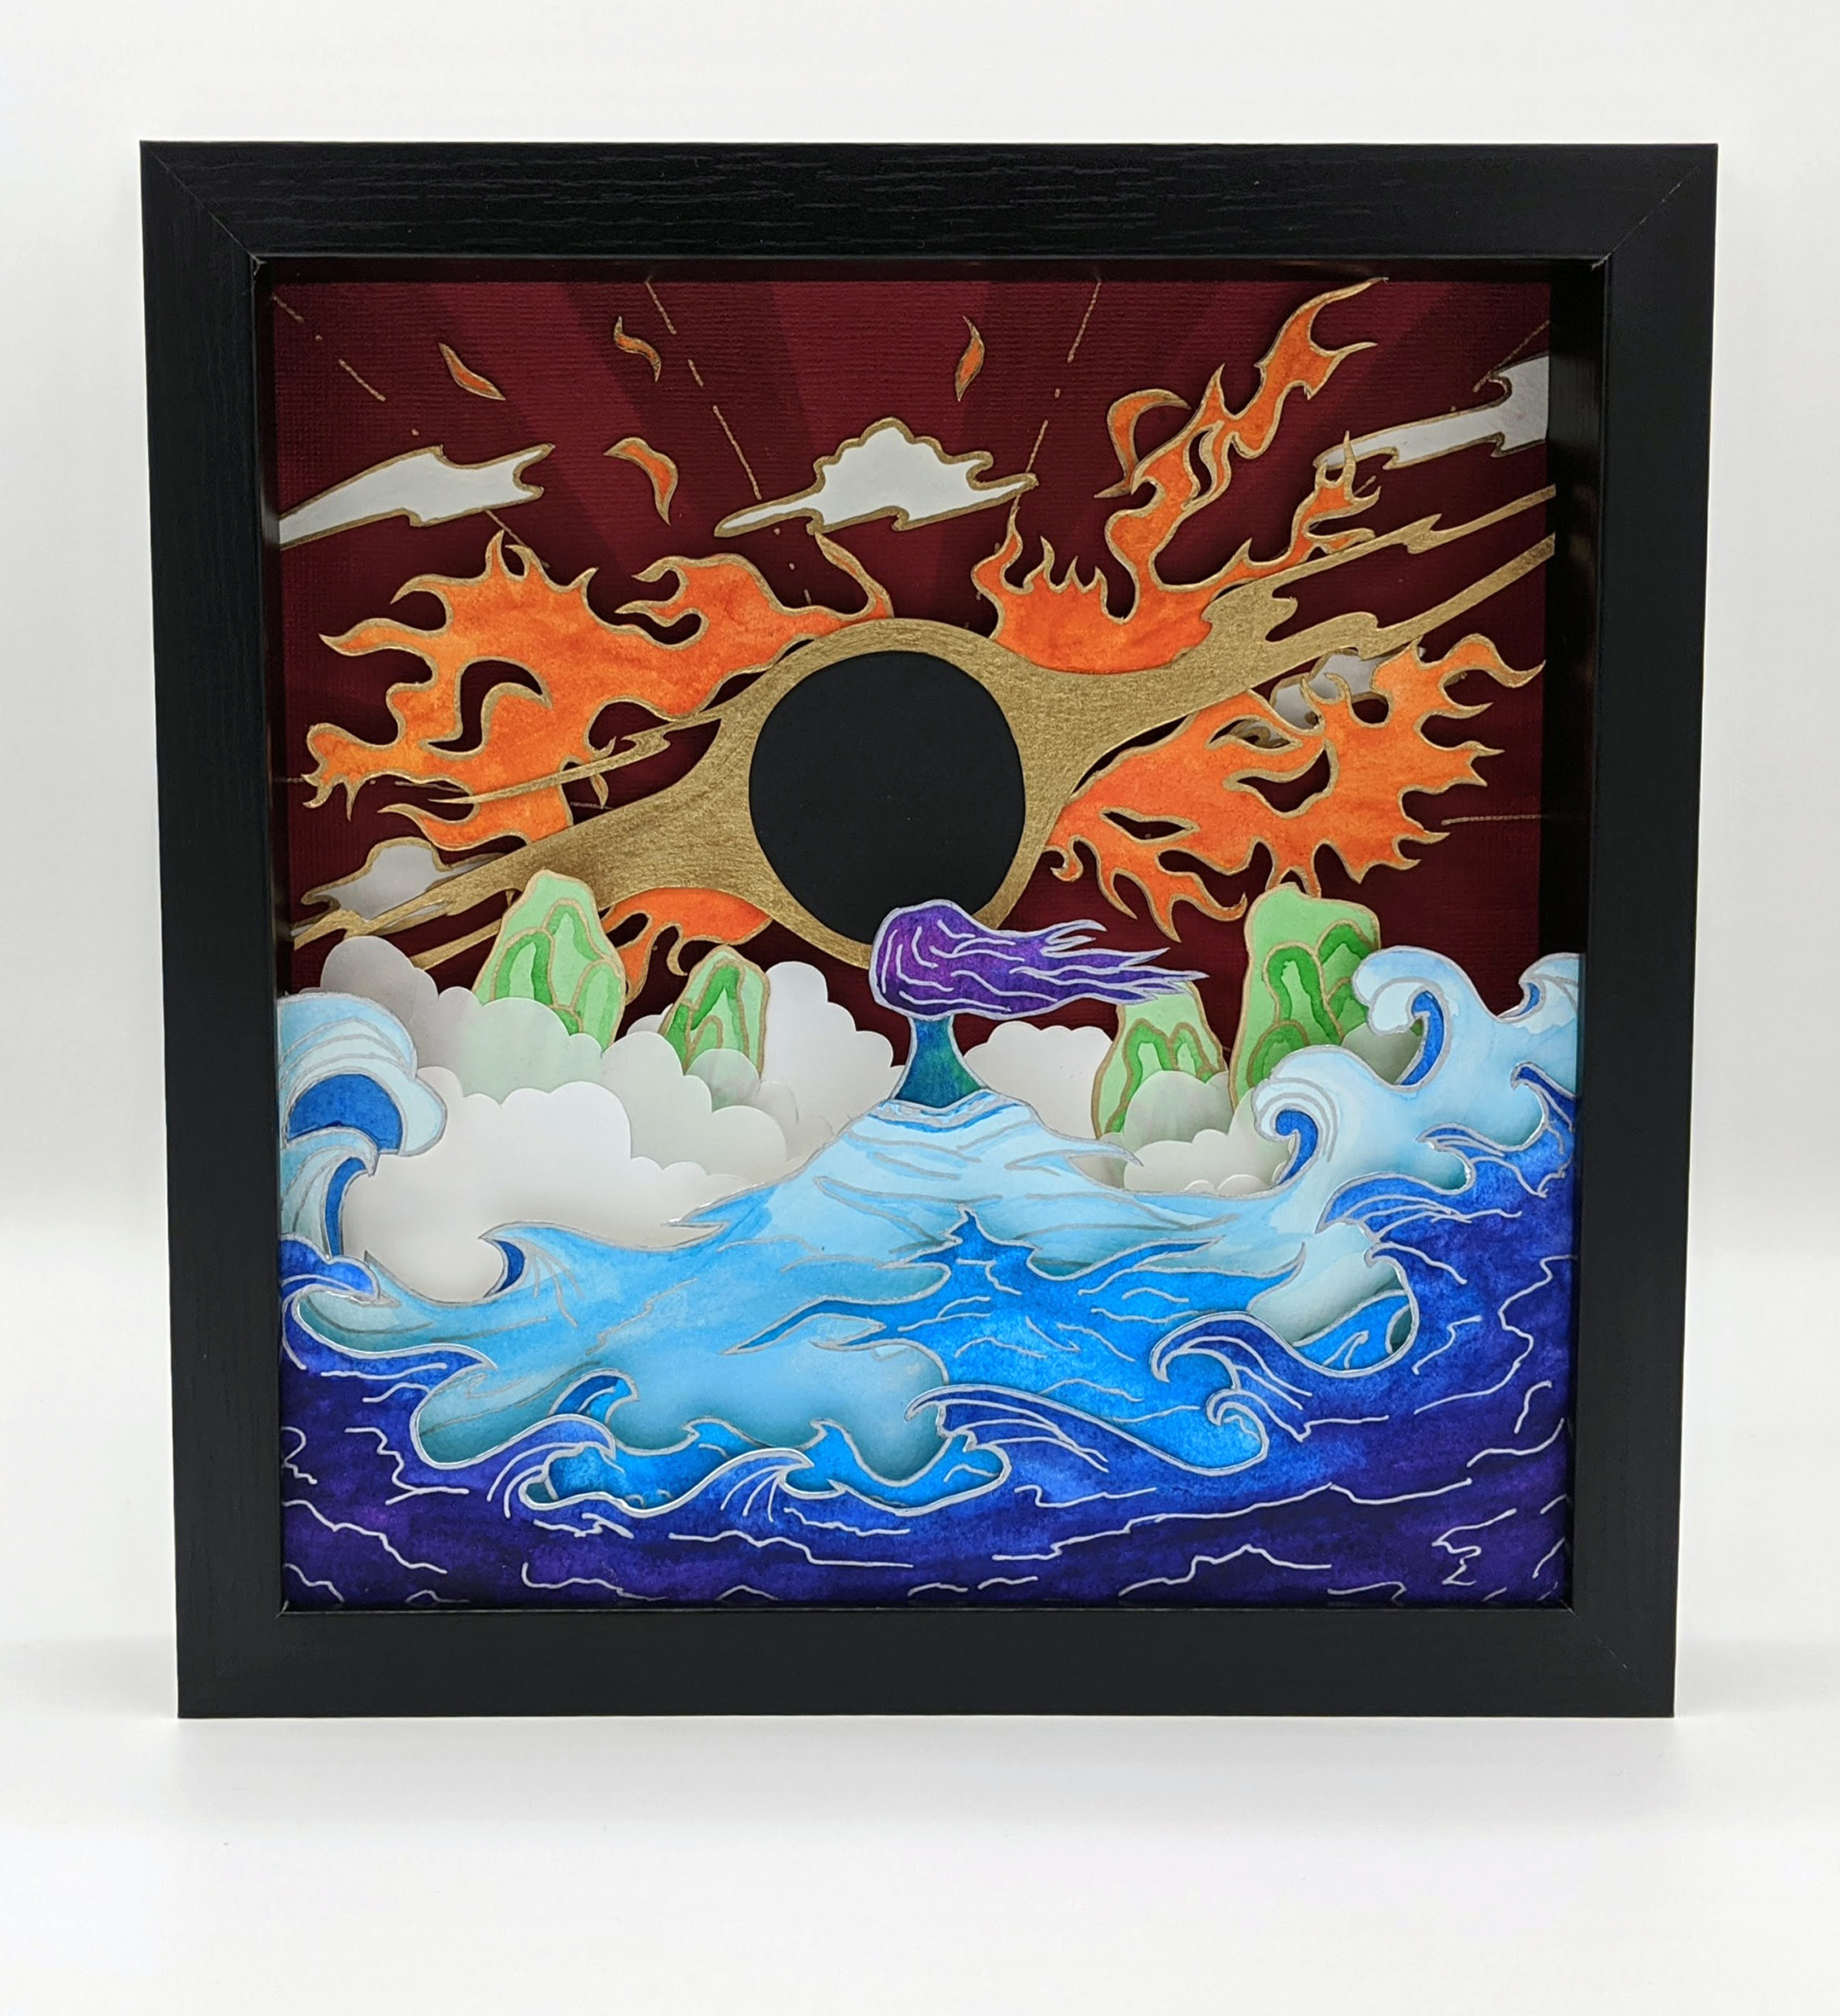 Paper Art of a woman of the sea confronting a flaming fire.